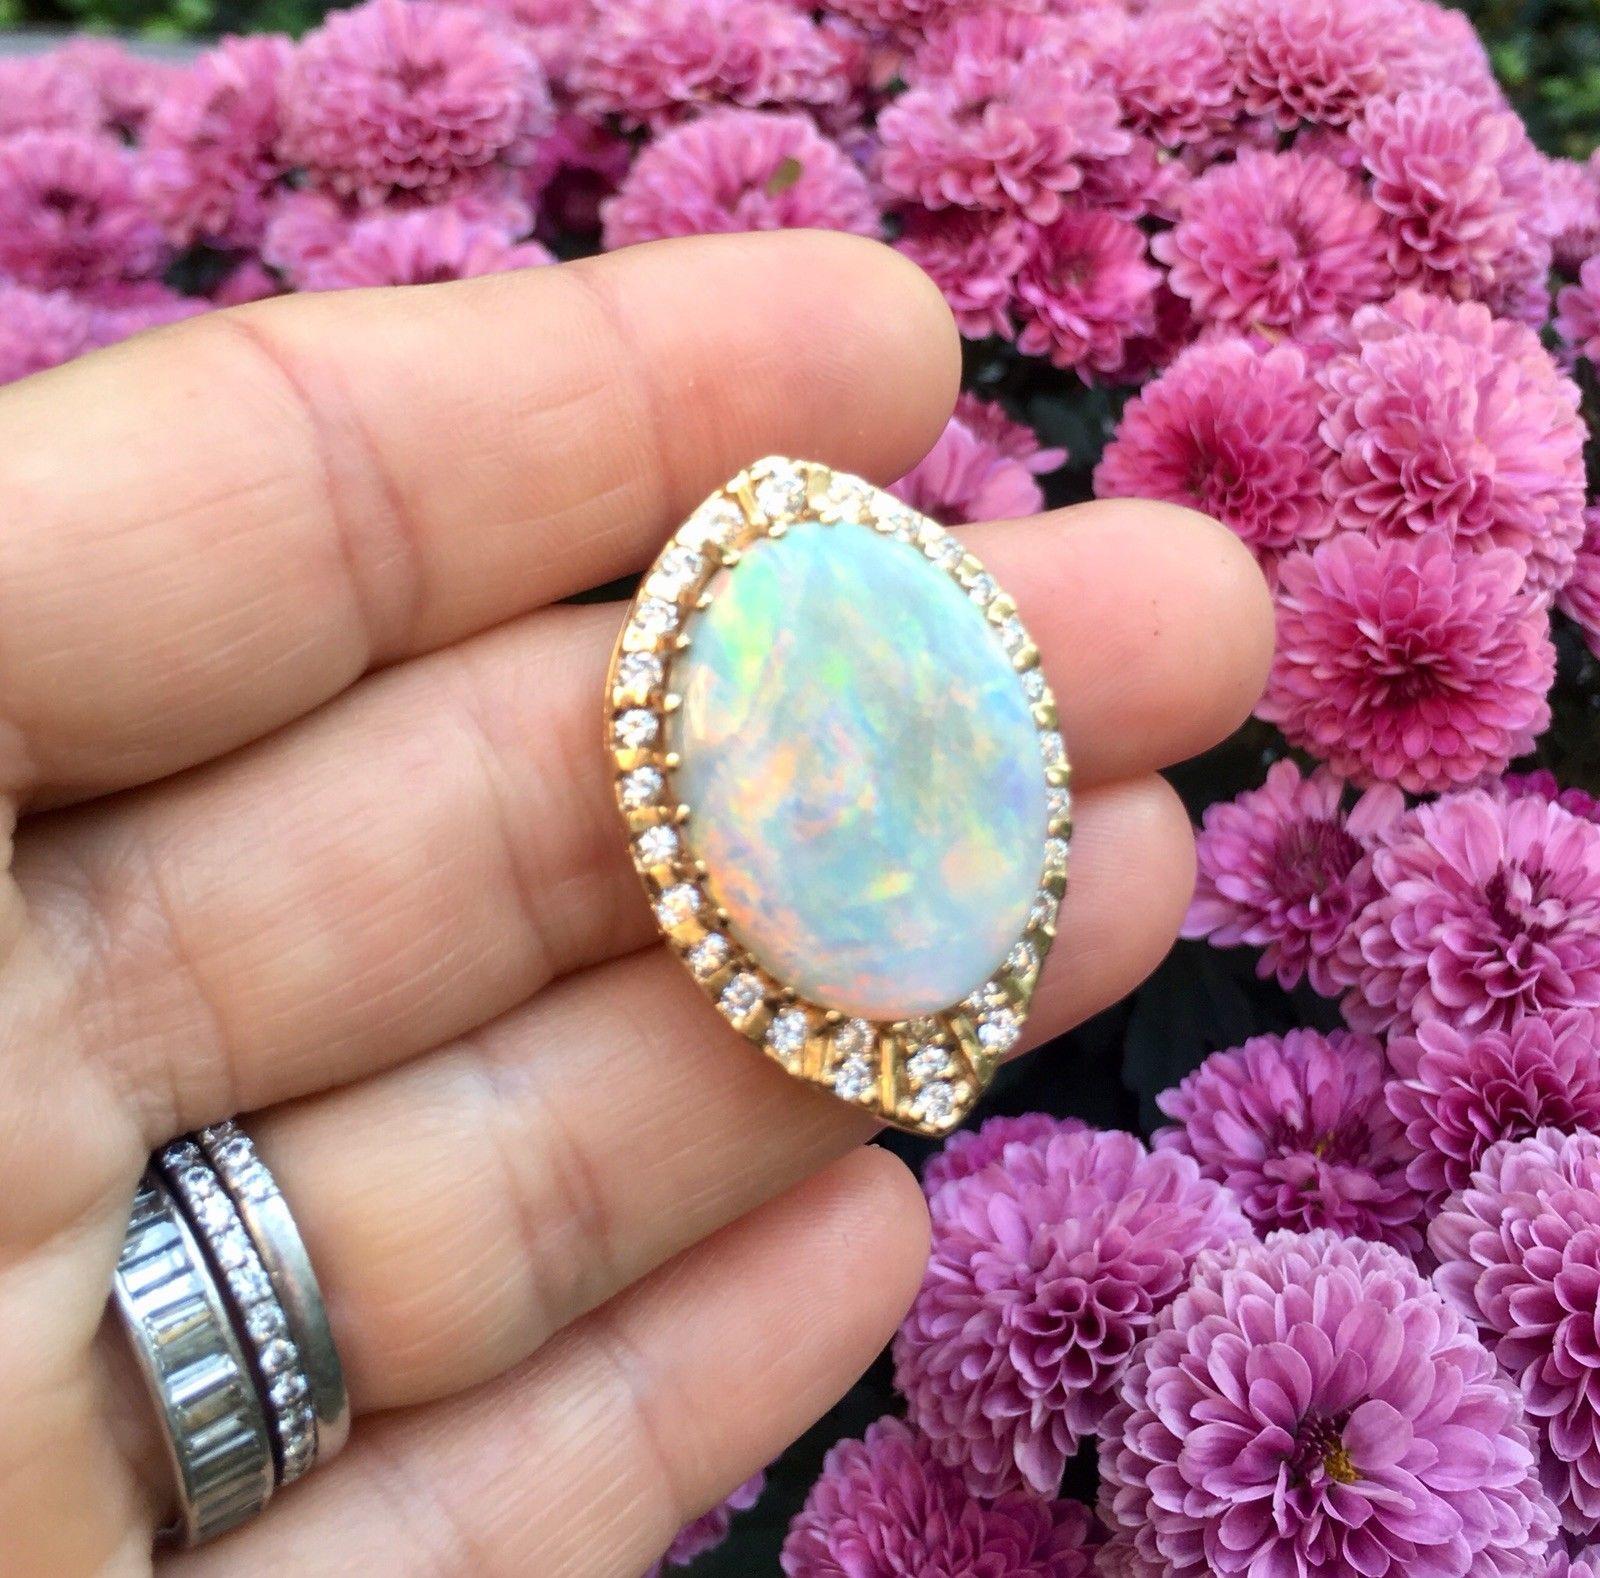 Impressive 1970s 14 Karat Gold 29 Carat Opal VS Diamond Brooch Necklace Pendant In Excellent Condition For Sale In Shaker Heights, OH